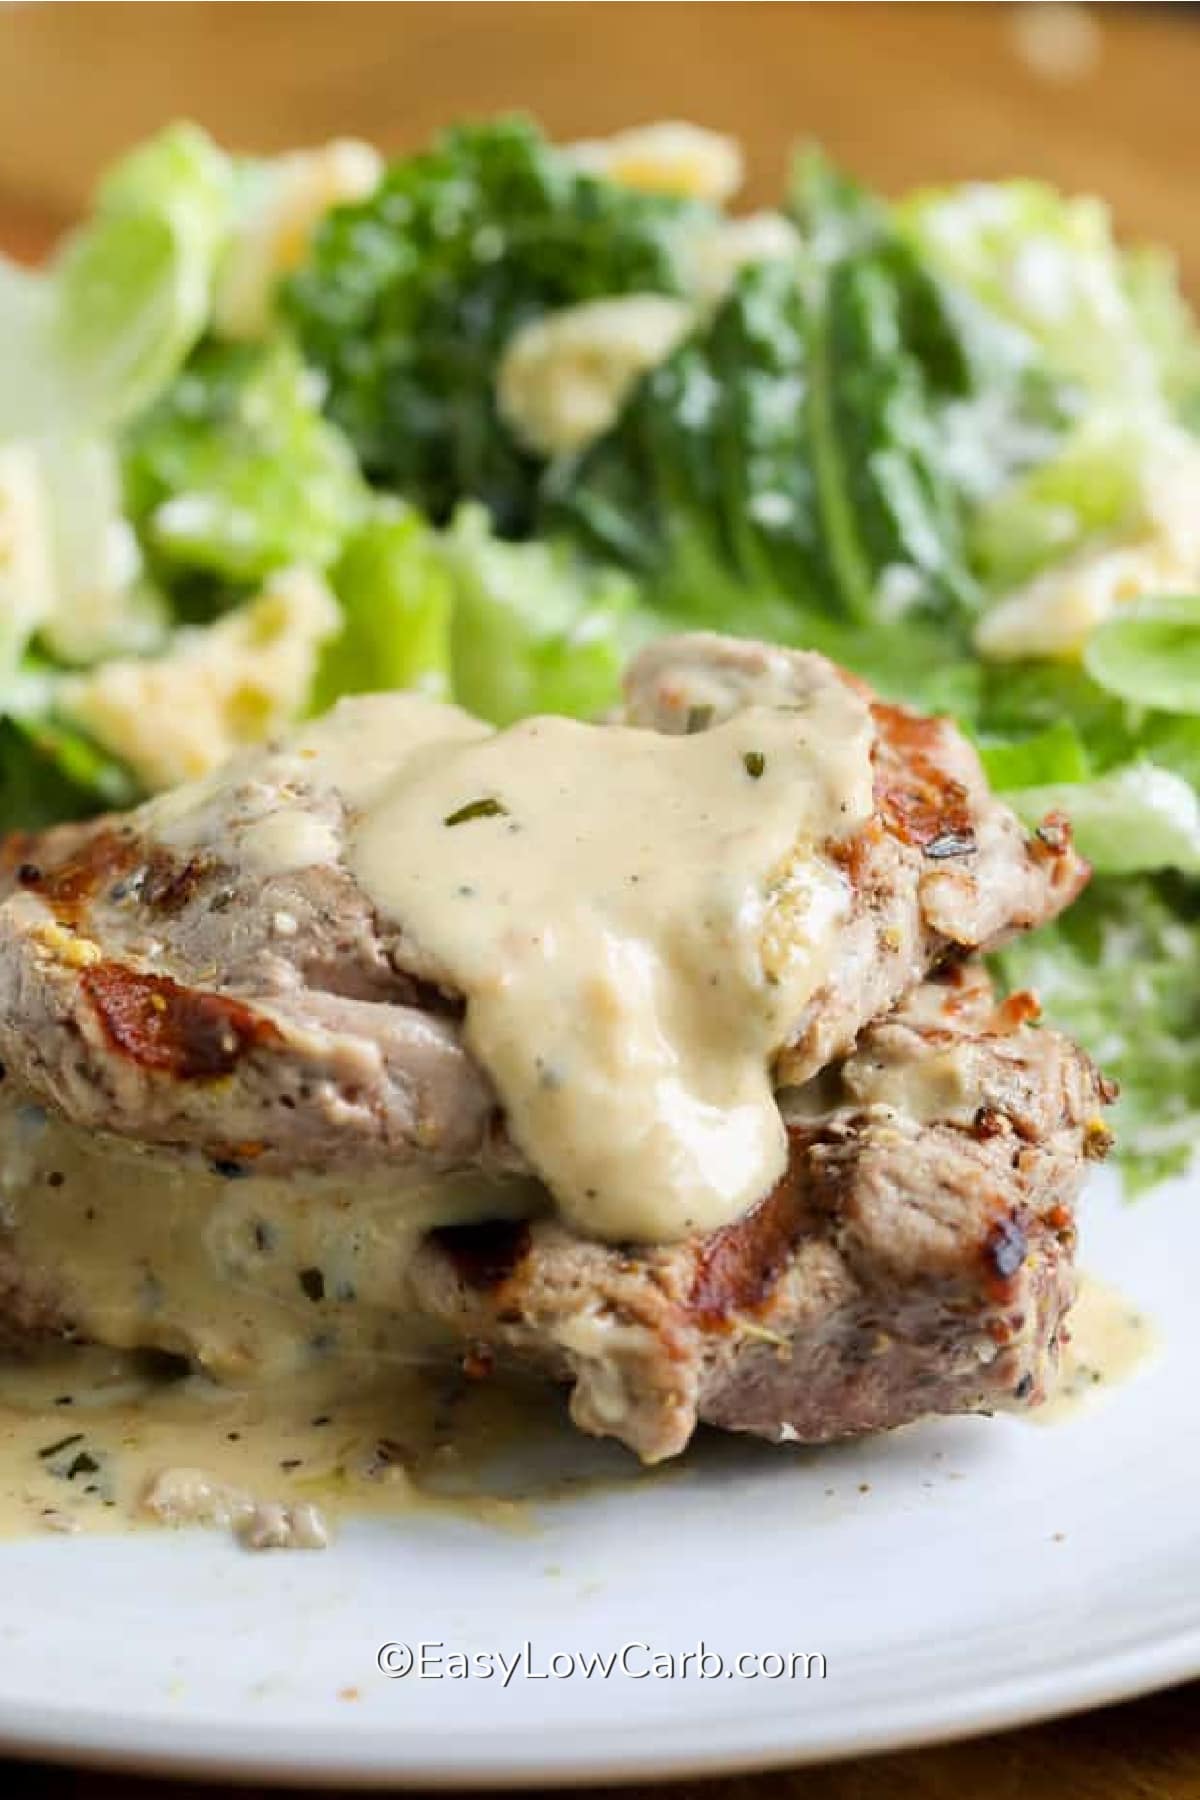 Creamy Dijon Pork Medallions served on a plate with salad in the background